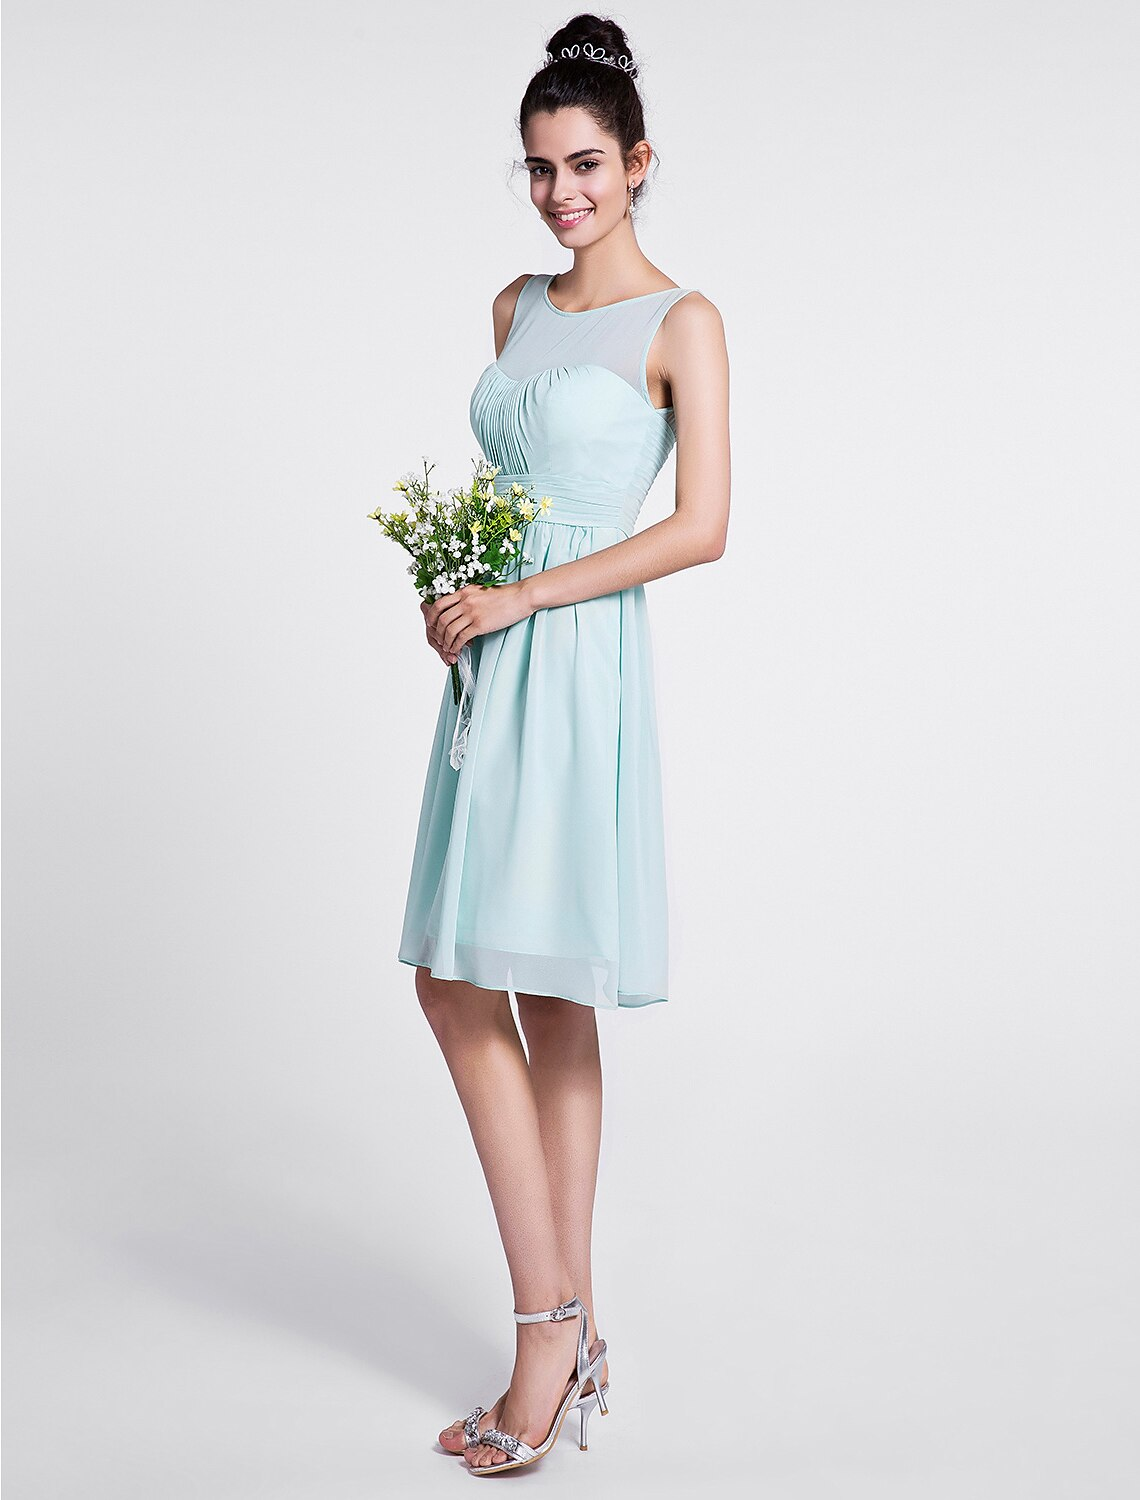 A-Line Bridesmaid Dress Scoop Neck Sleeveless Knee Length Chiffon with Ruched / Draping